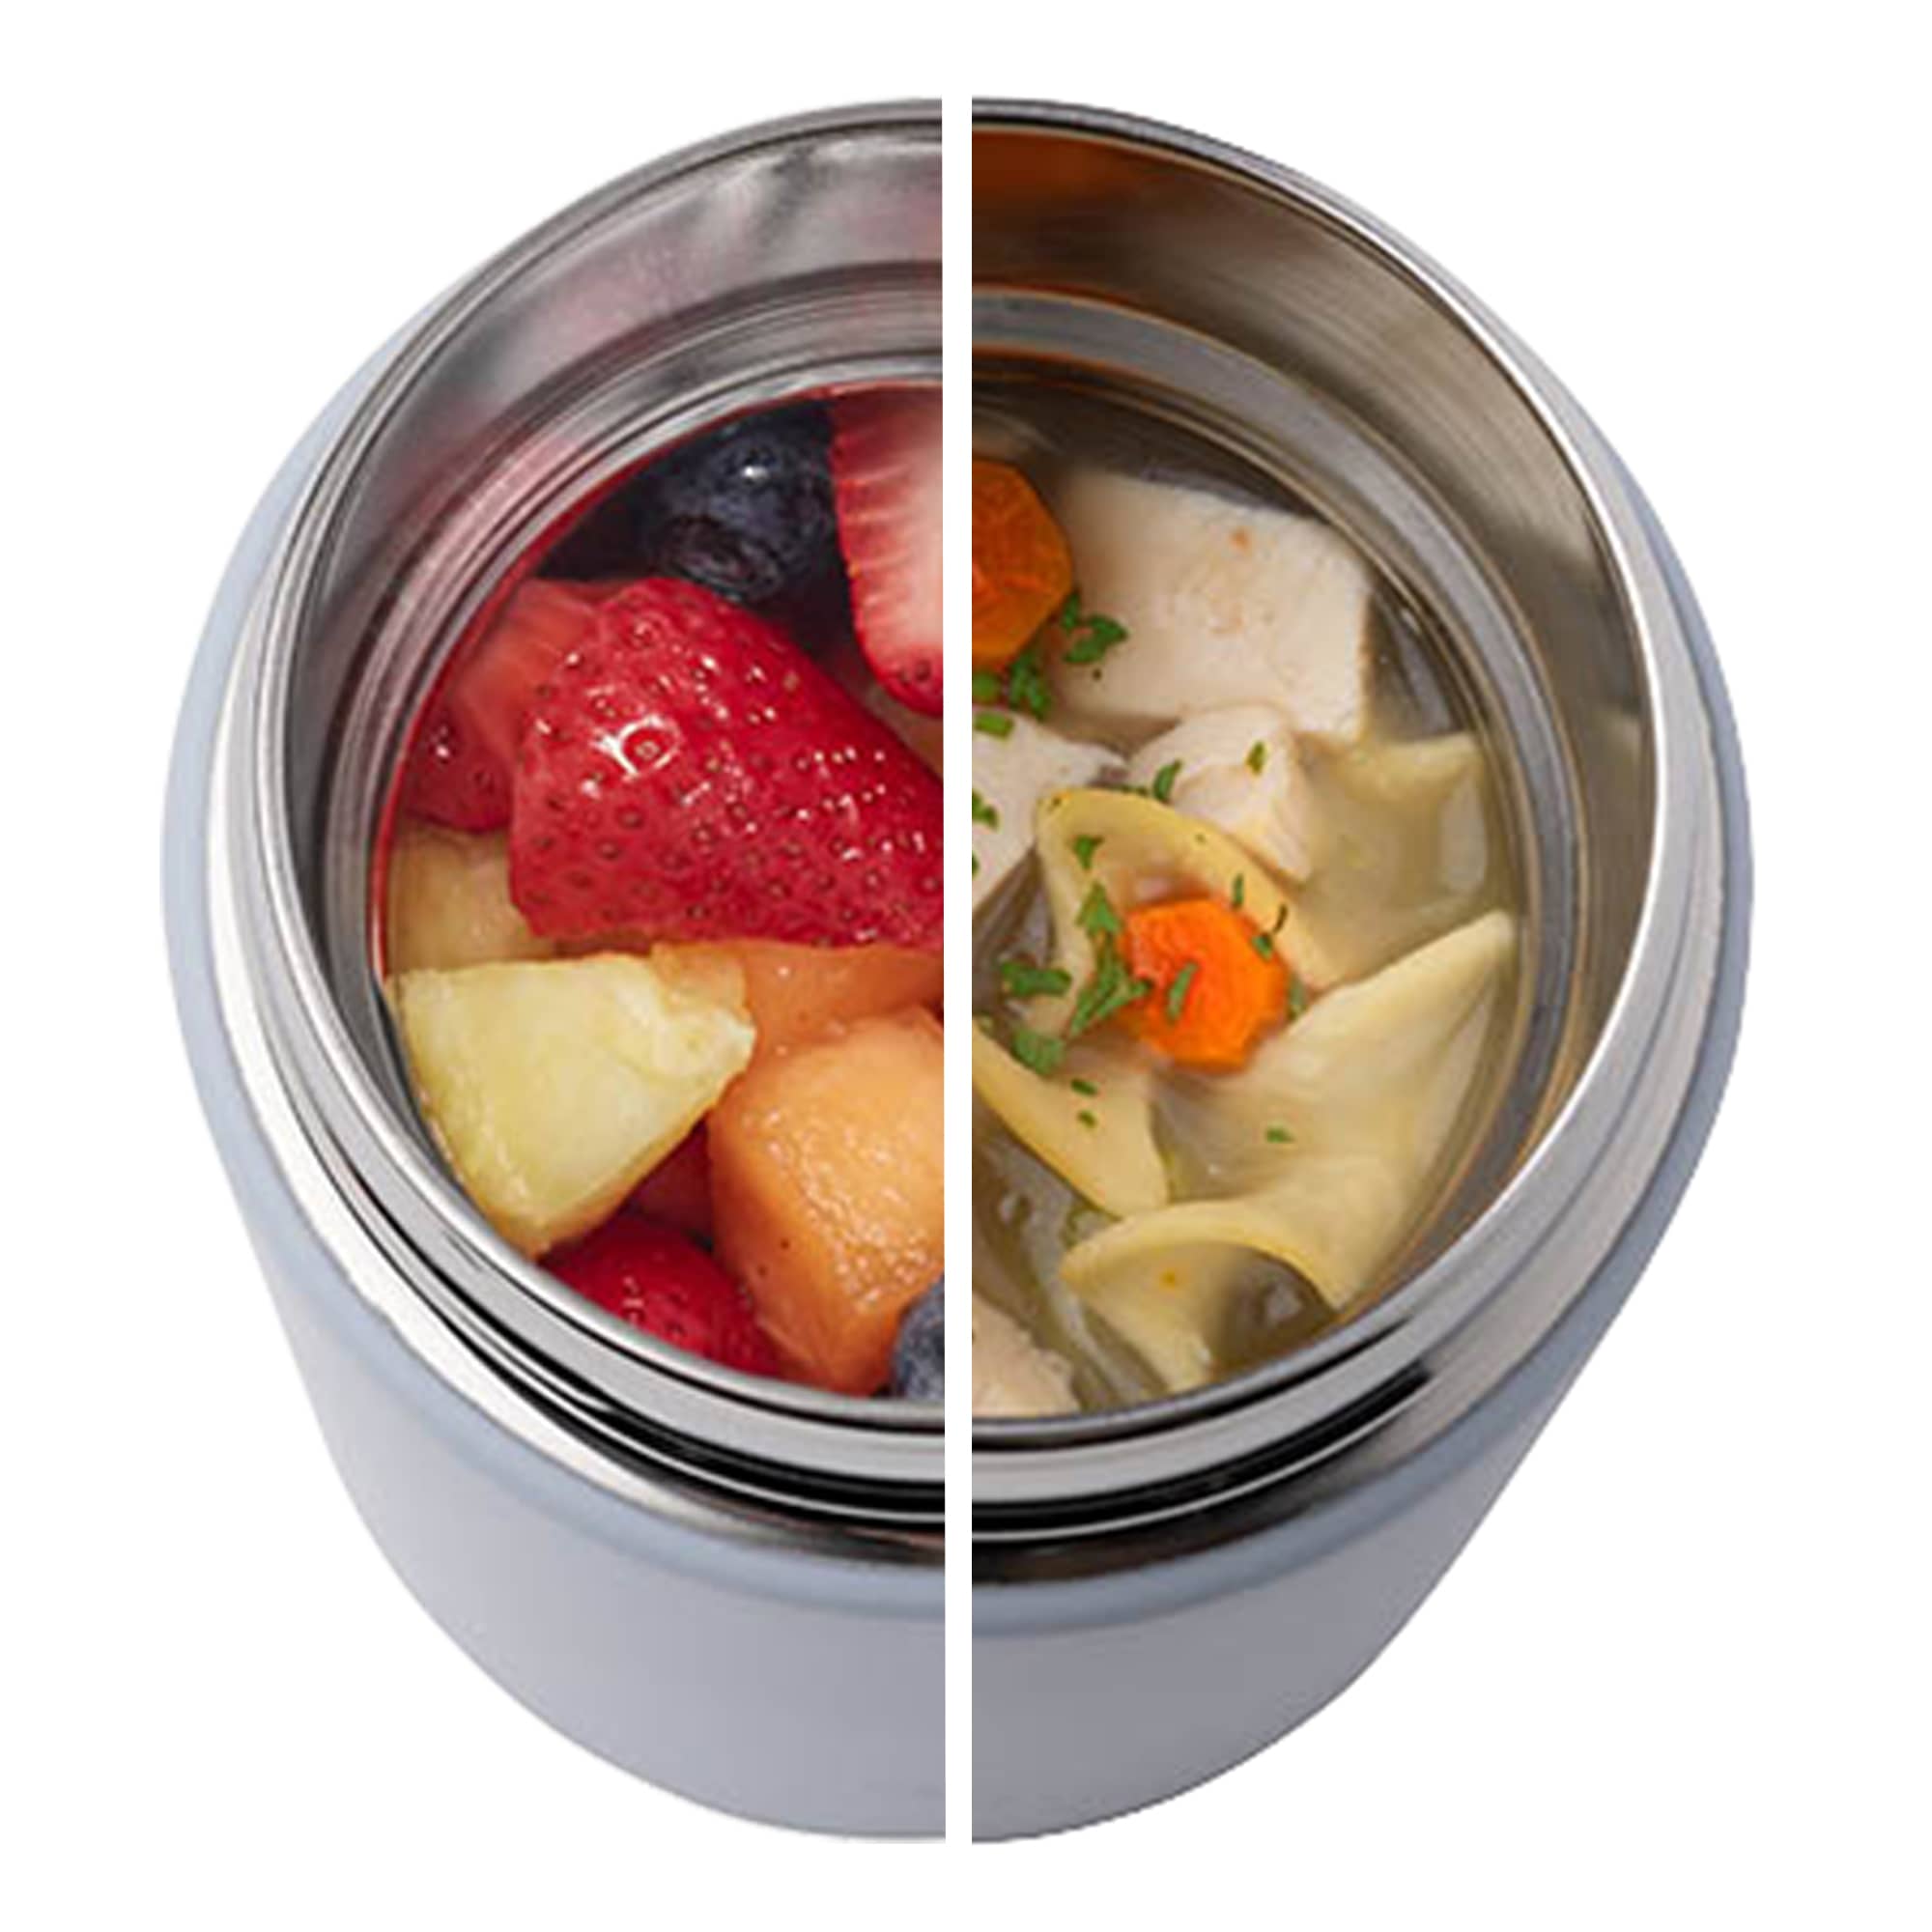 16oz Stainless Steel Vacuum Insulated Food Jar for Hot Foods and Soups - Black